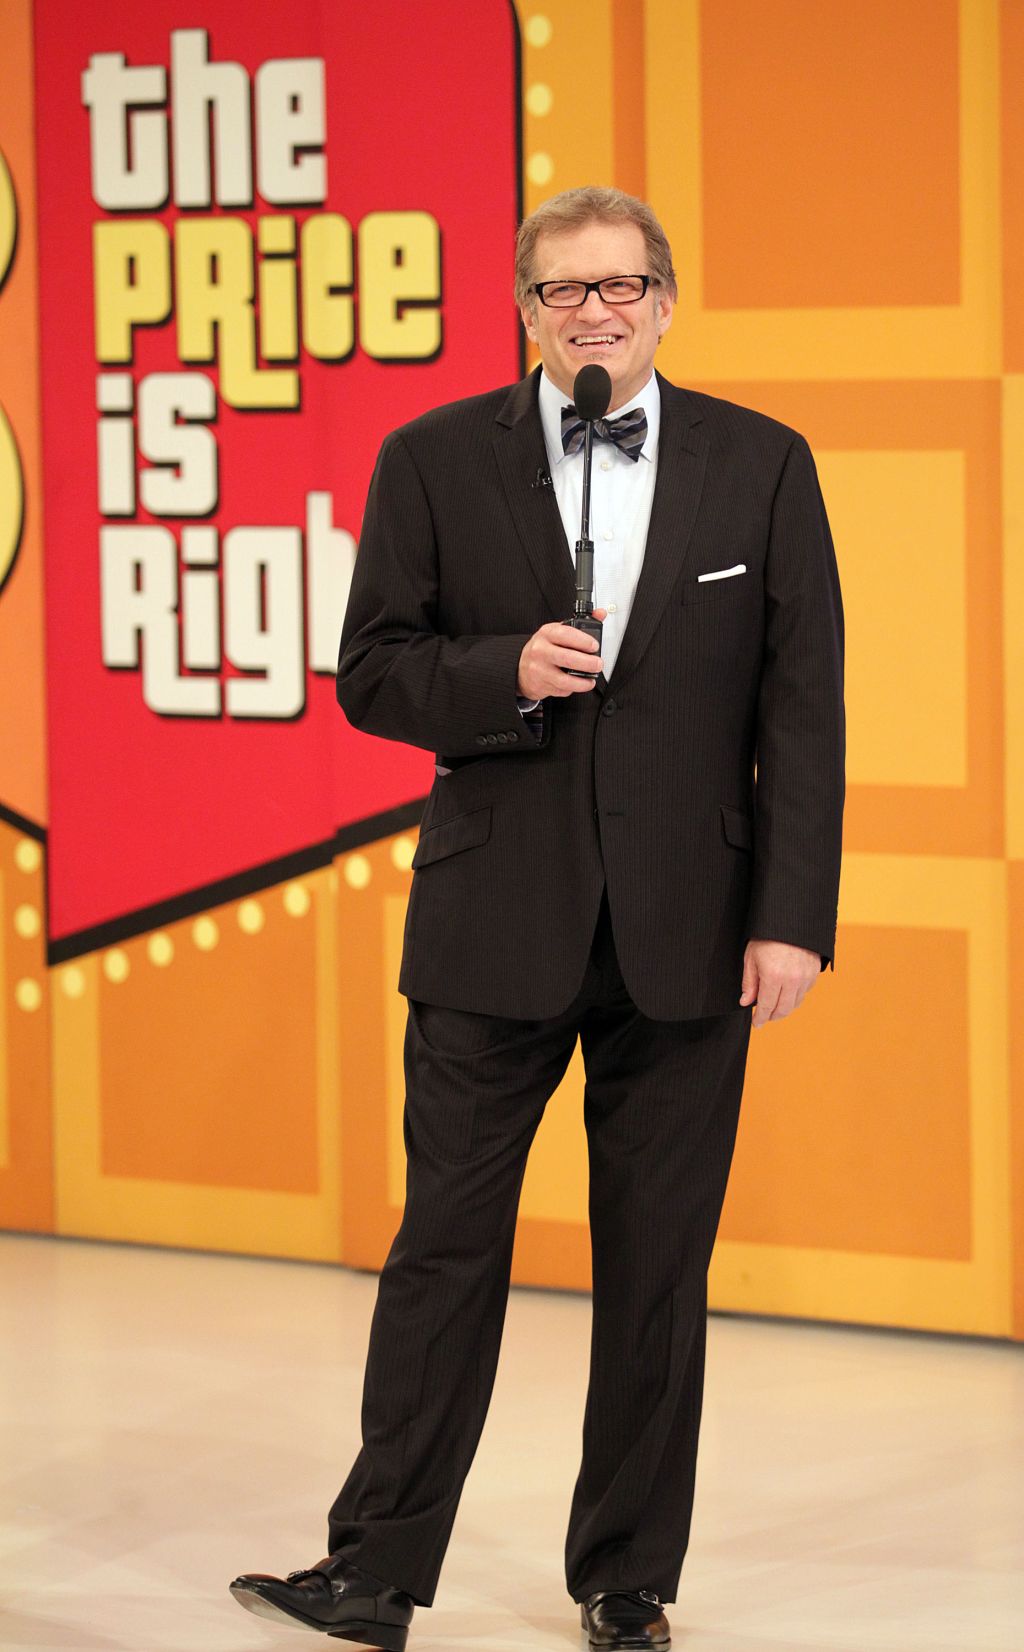 Drew Carey at The Price Is Right showcase